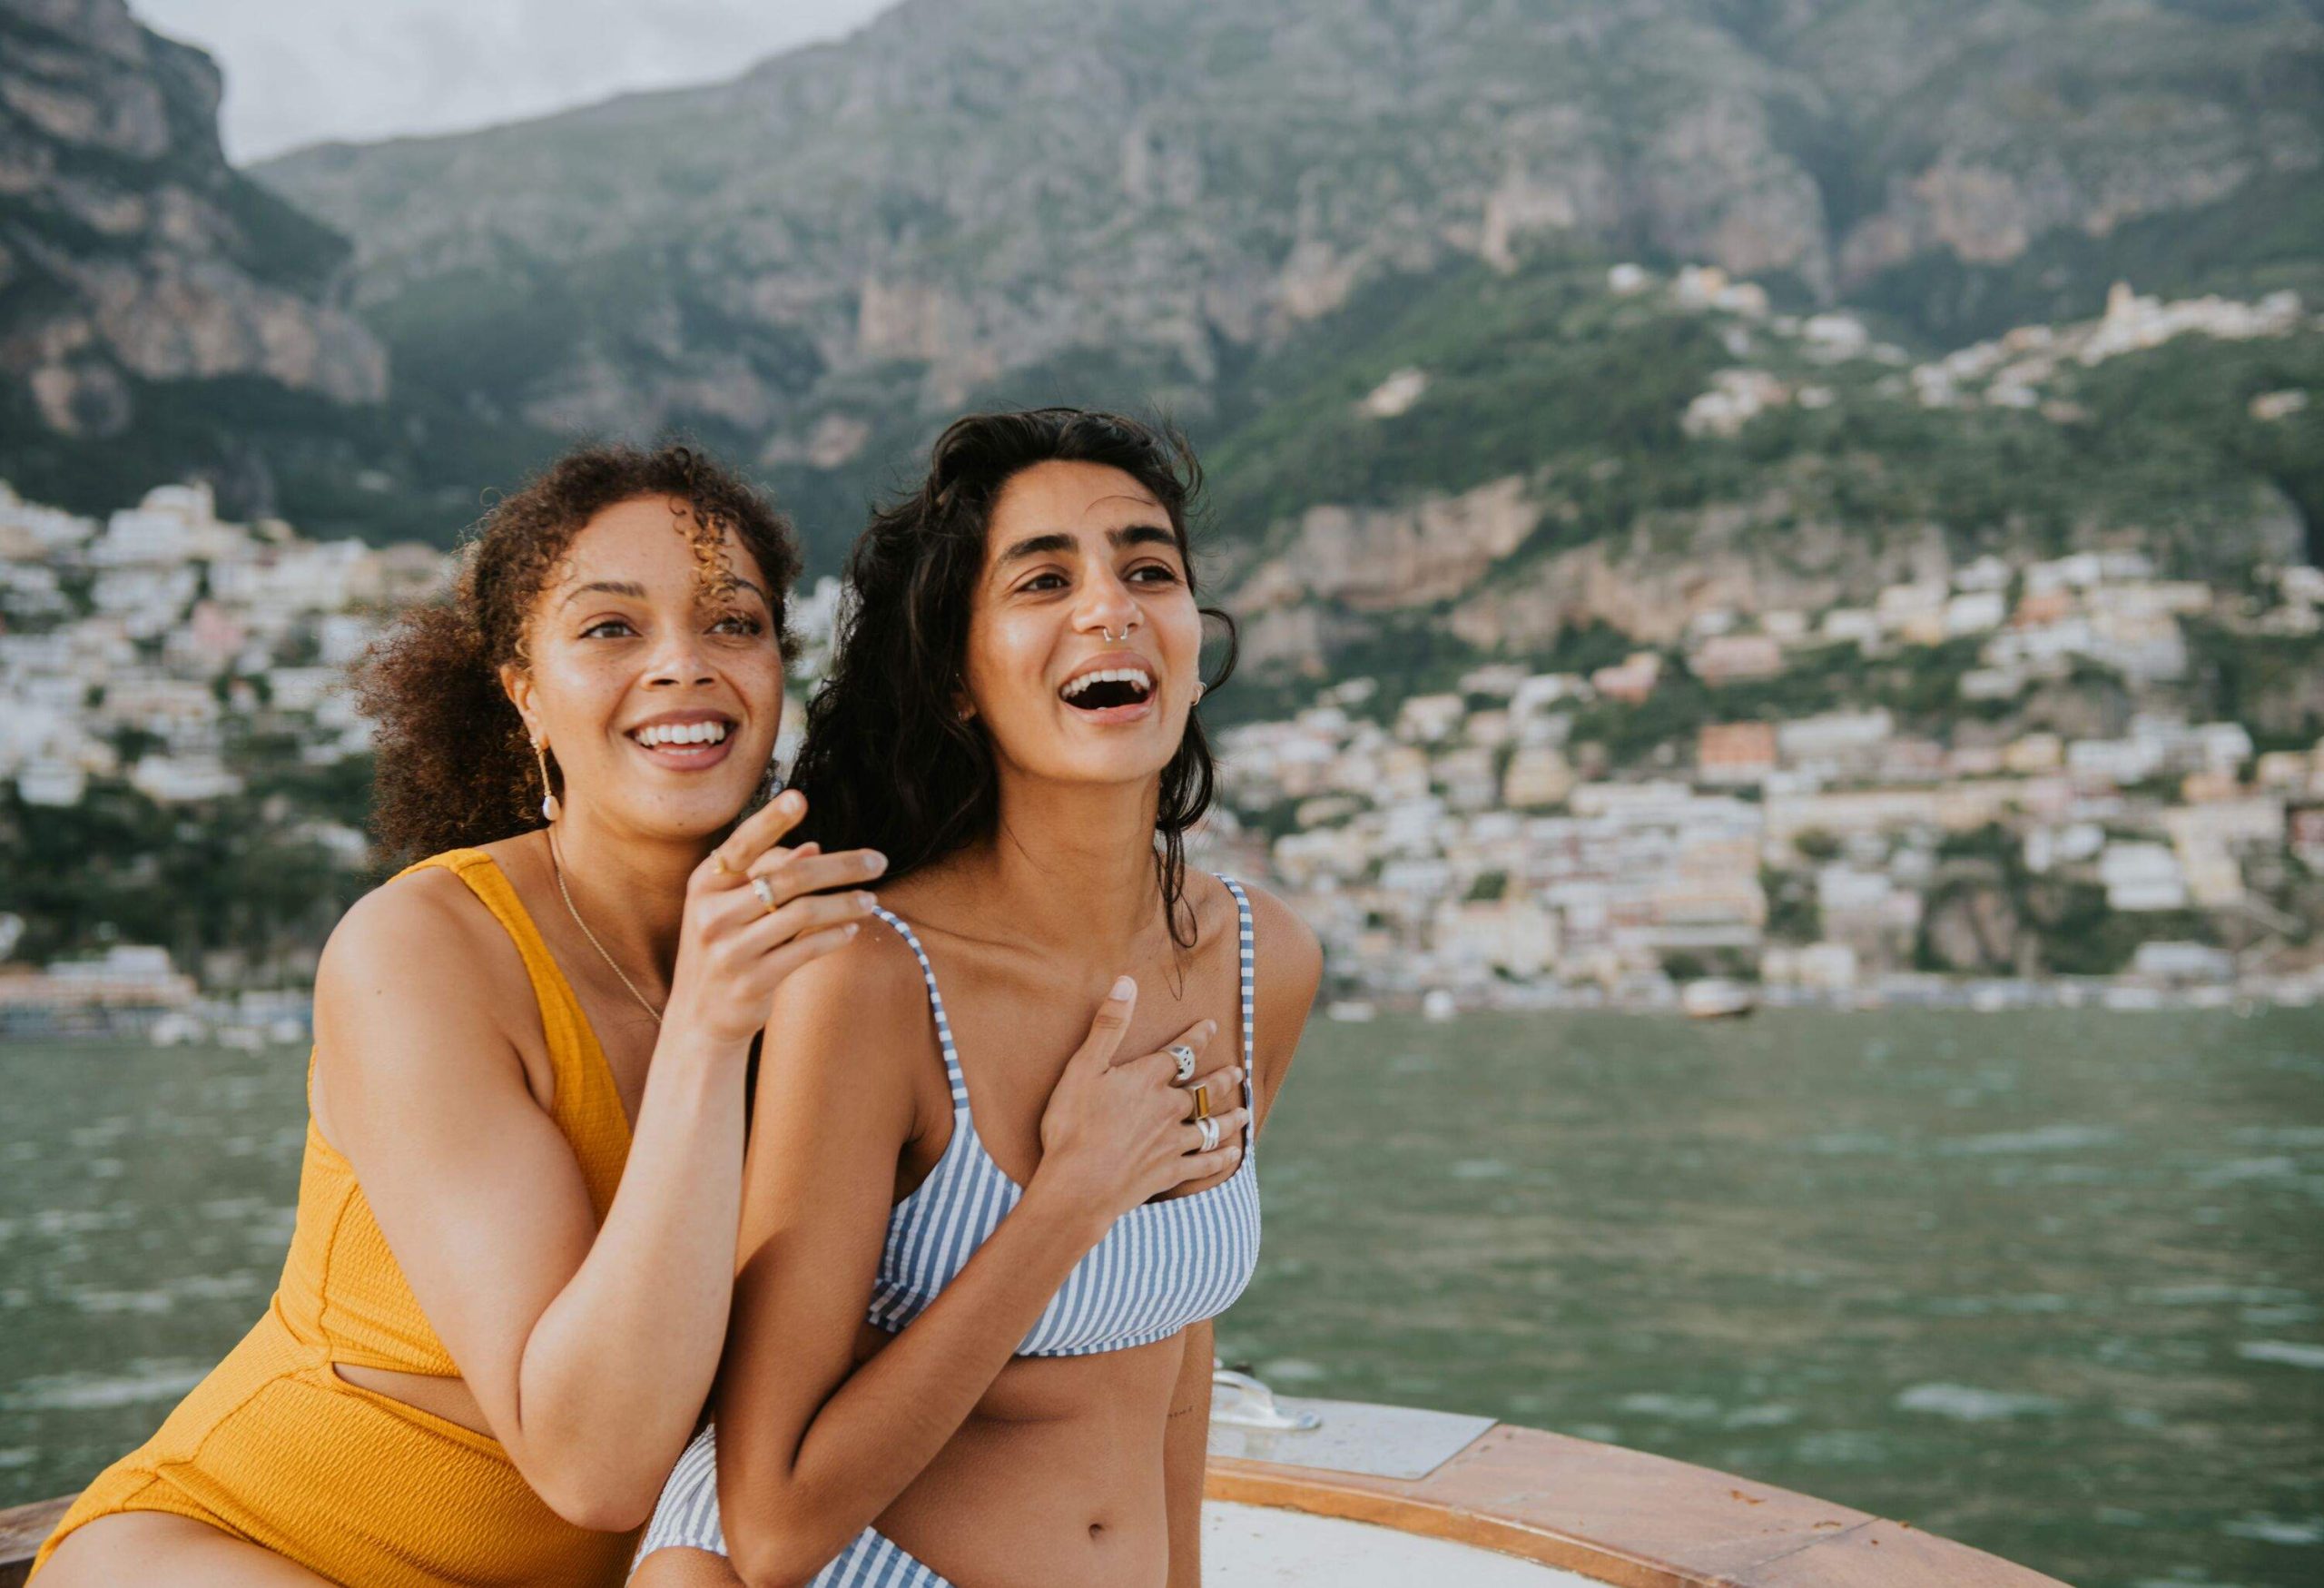 Two woman sit close together on the stern of a yacht. One points at something out of frame, and her friend looks surprised and delighted. View of Positano, Italy, visible in the background.